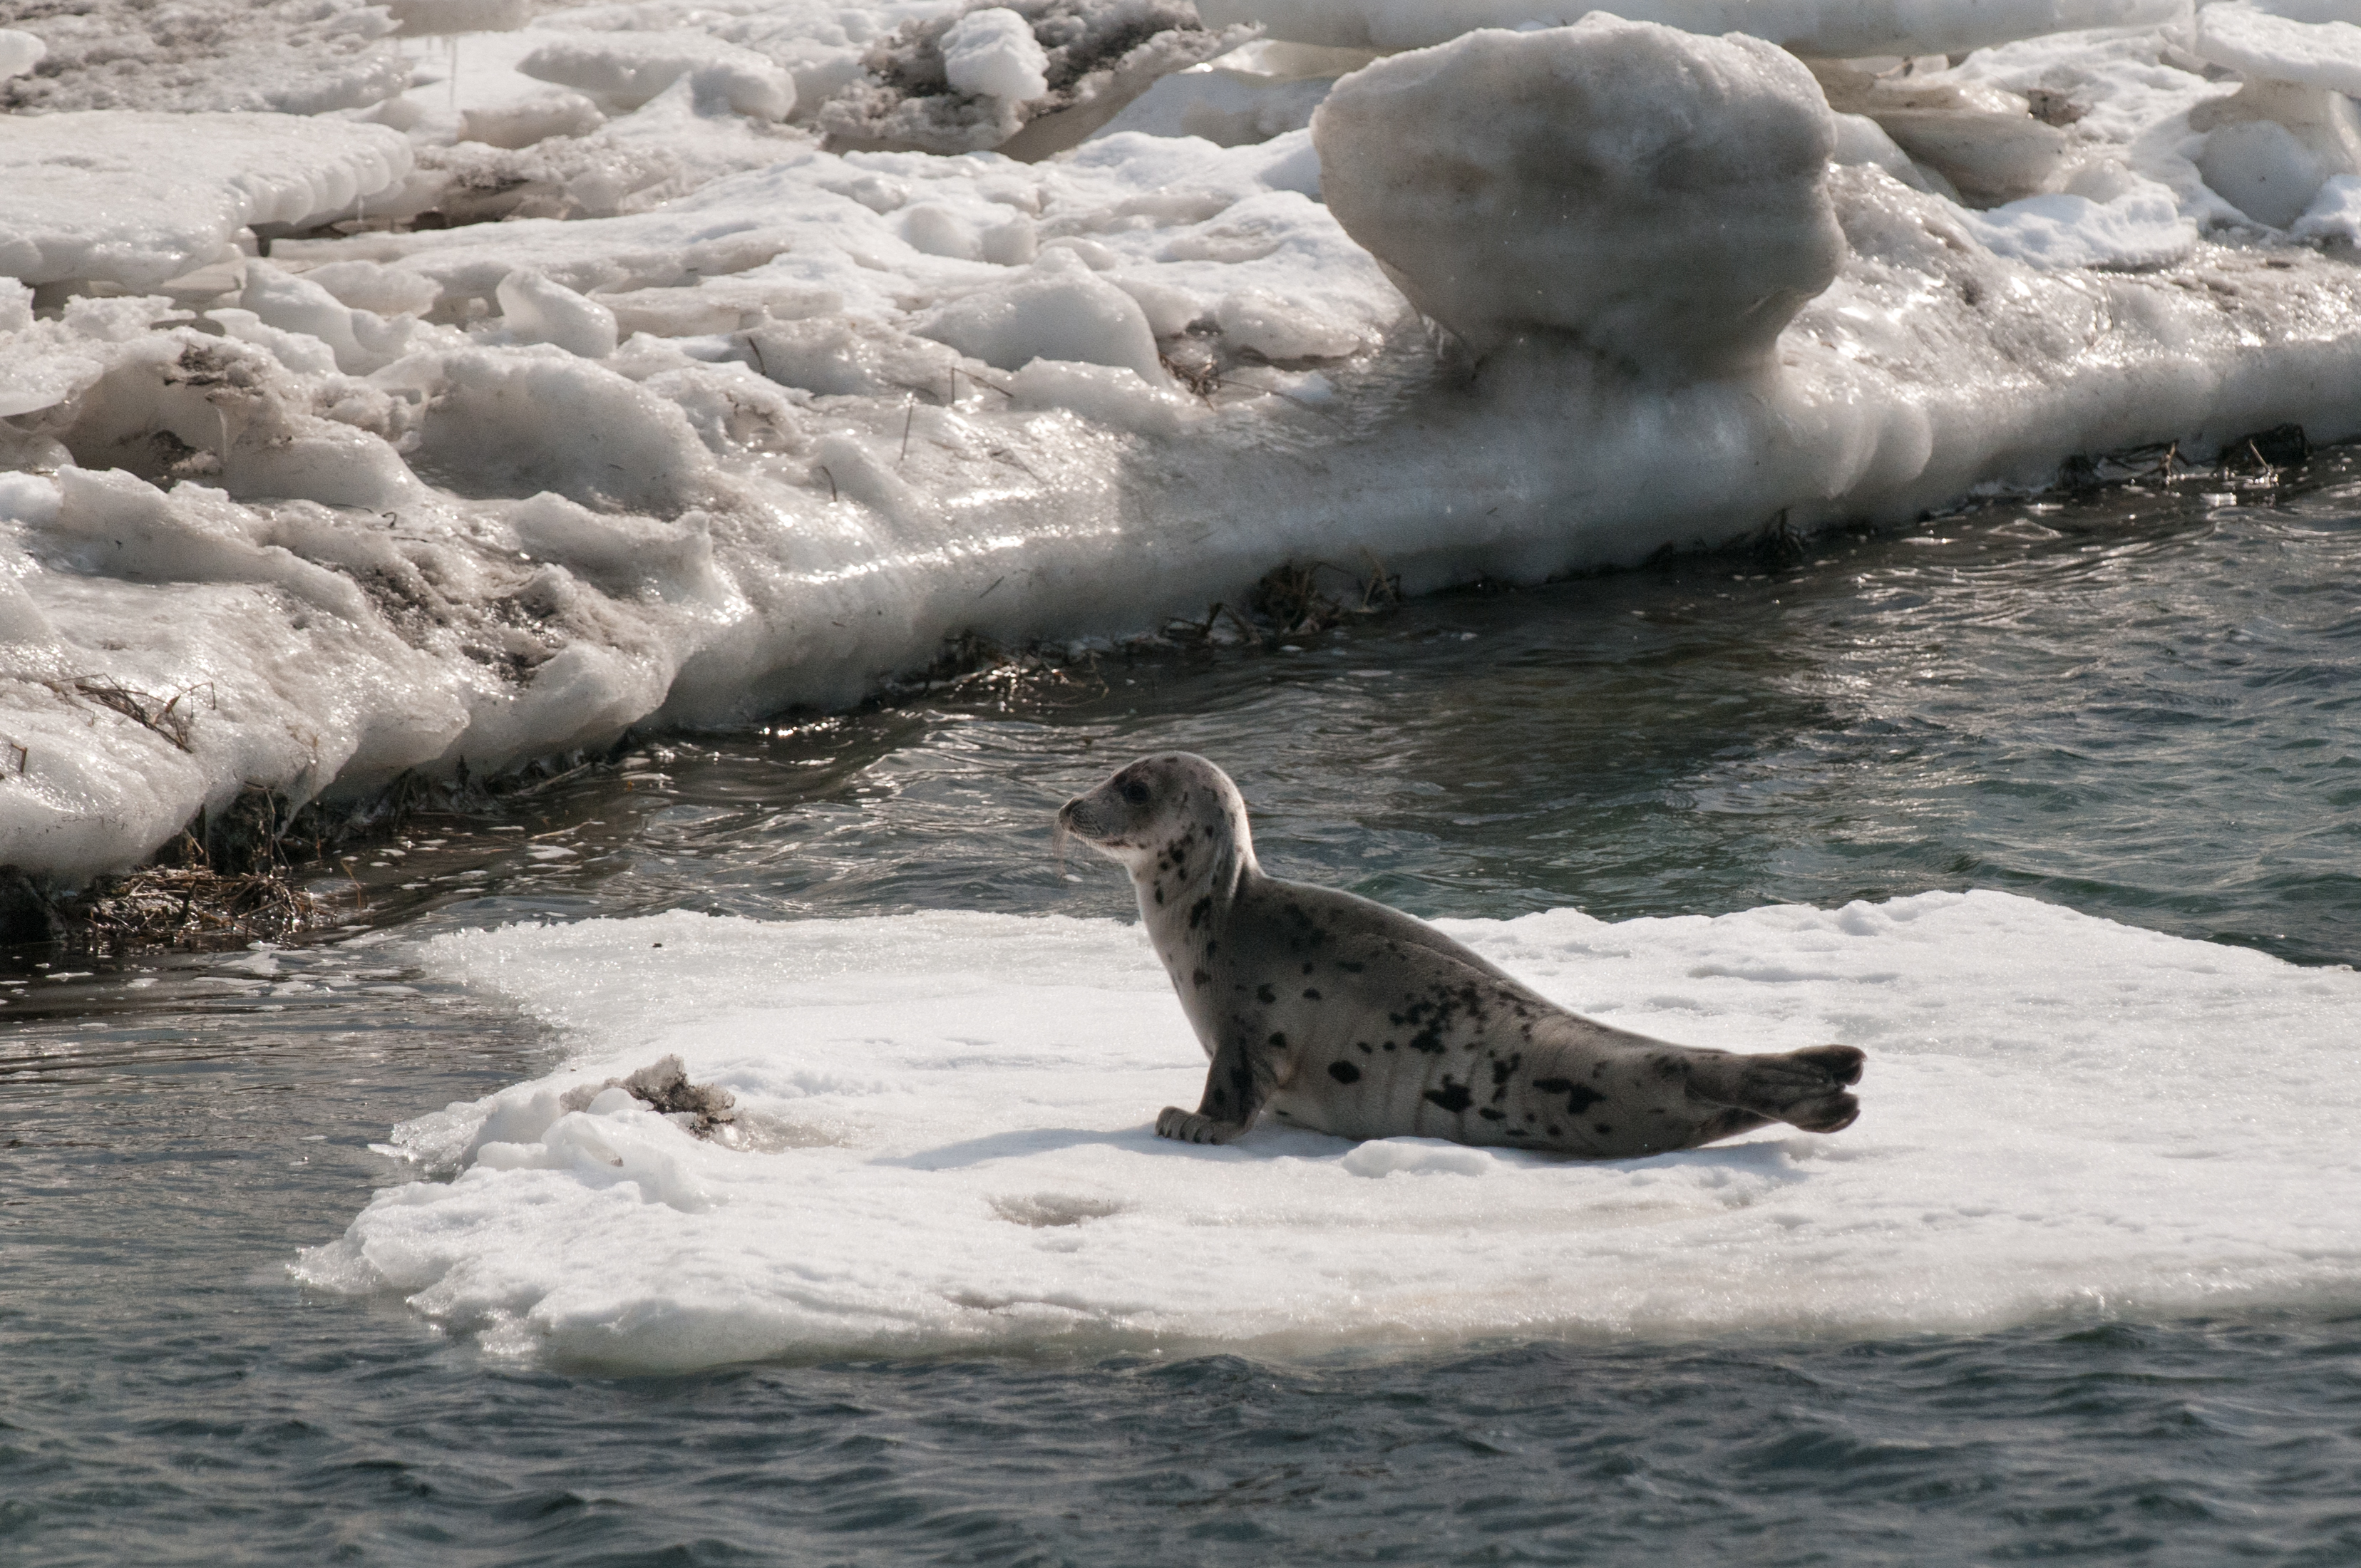 Image: Seals, Sea Lions, and Climate Change: Shifting Prey and Habitat Impacts